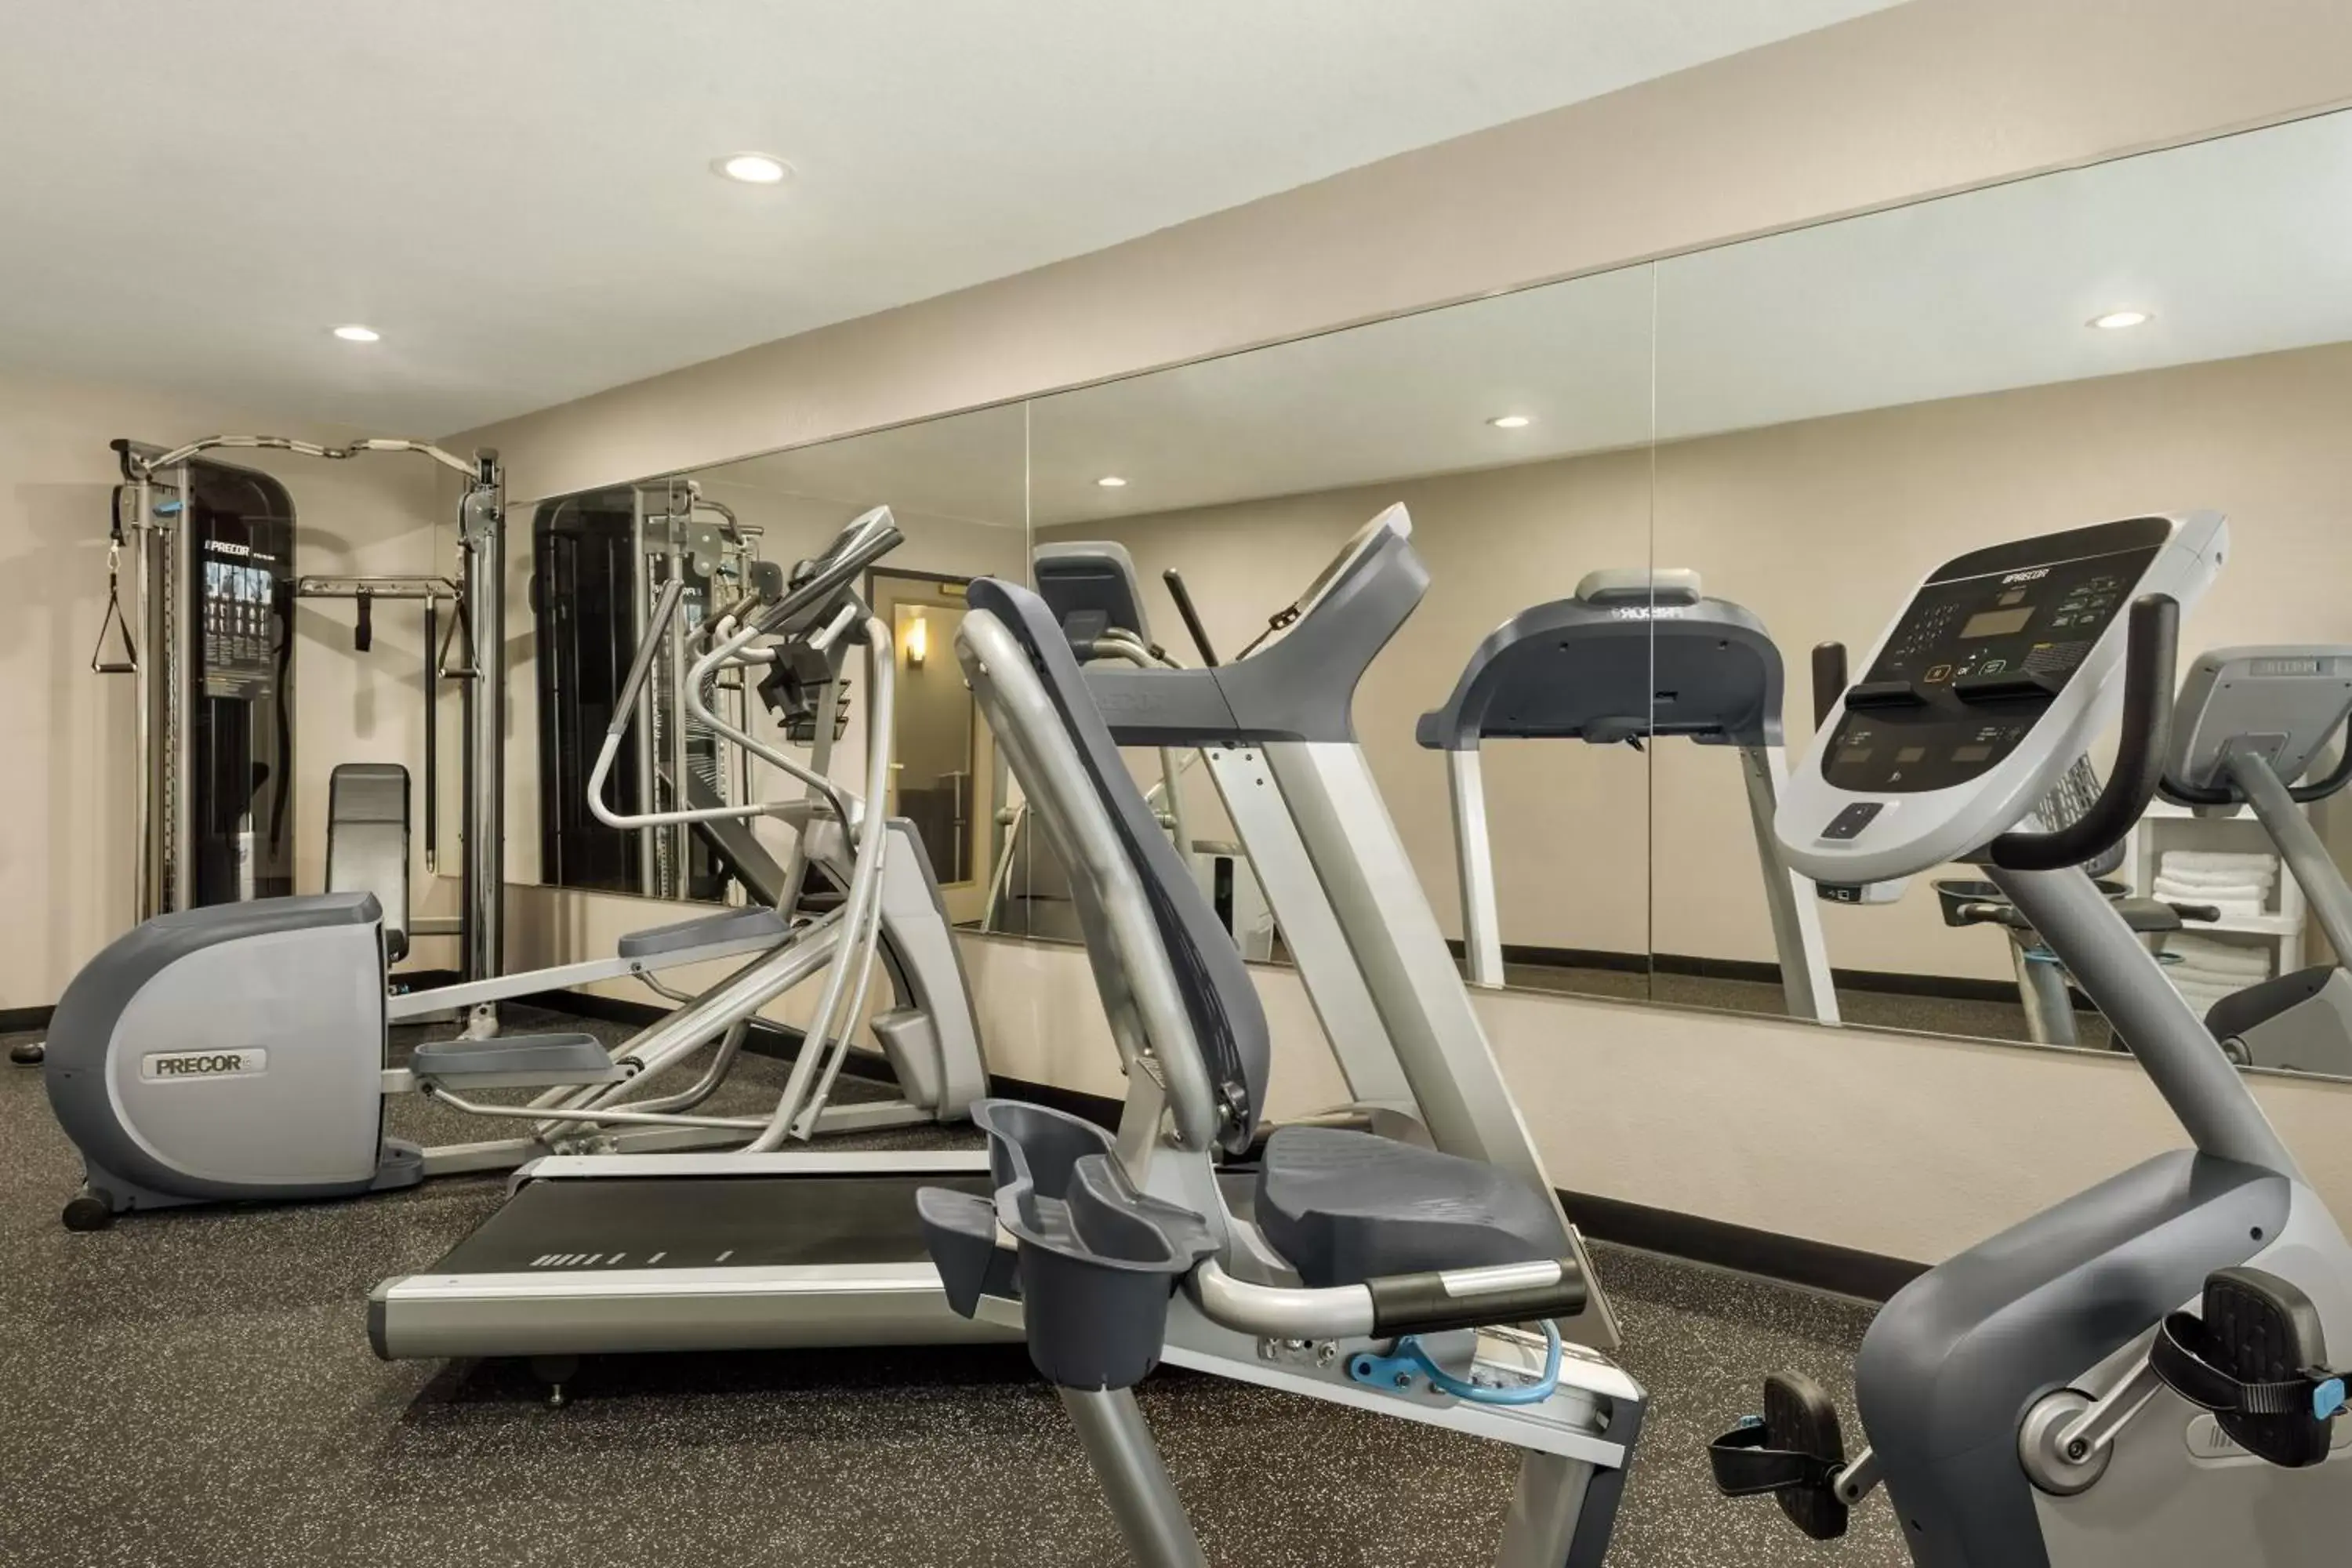 Fitness centre/facilities, Fitness Center/Facilities in Country Inn & Suites by Radisson, Decorah, IA